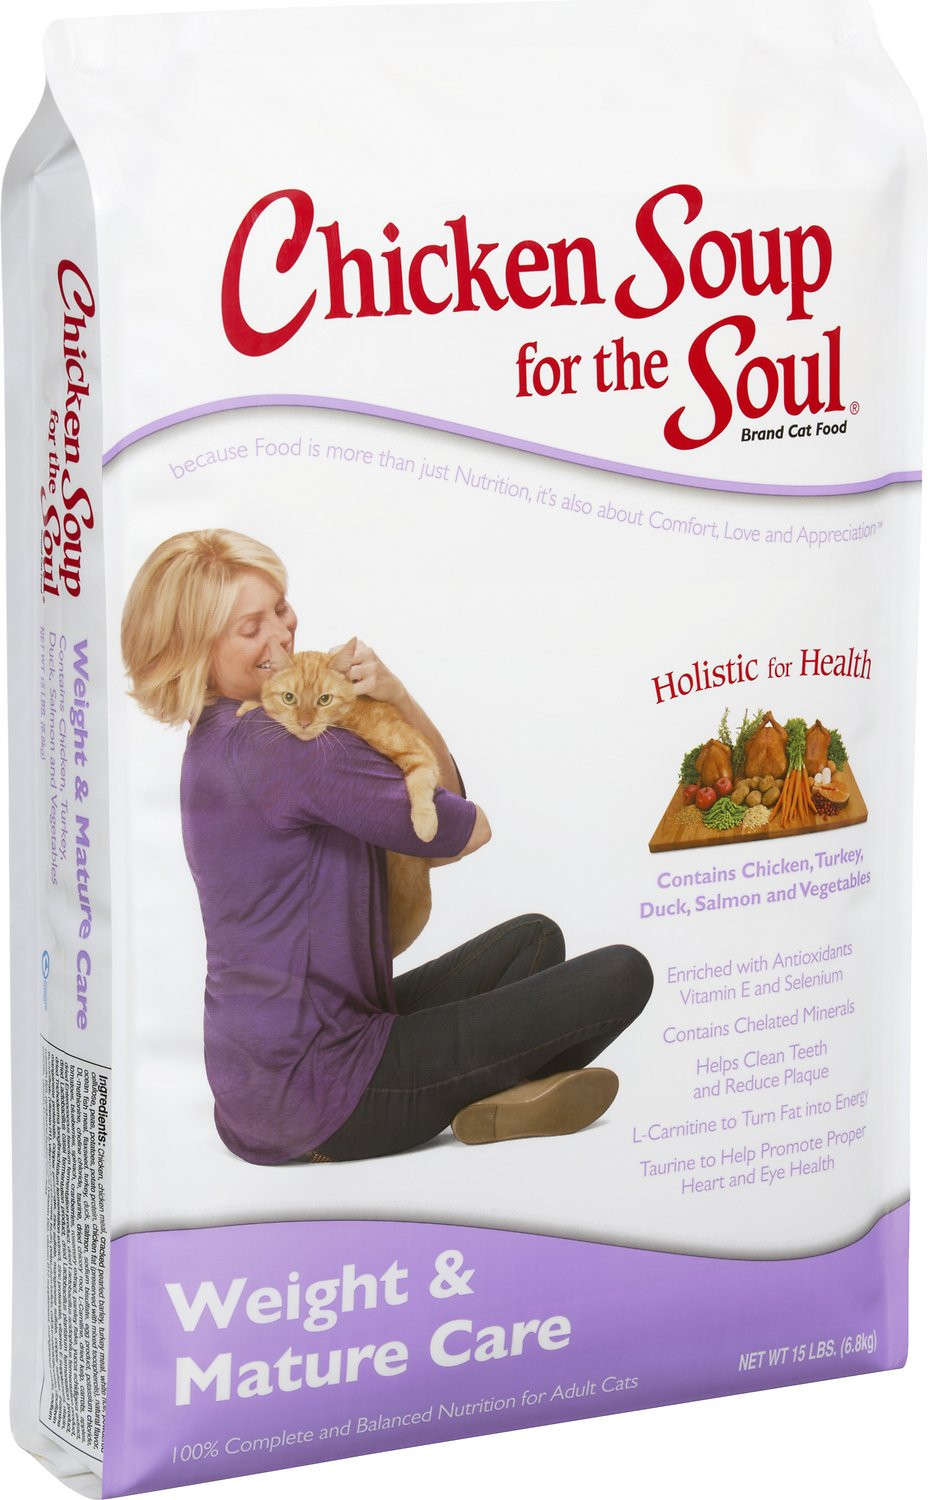 Chicken Soup Cat Food
 Chicken Soup for the Soul Weight & Mature Care Dry Cat